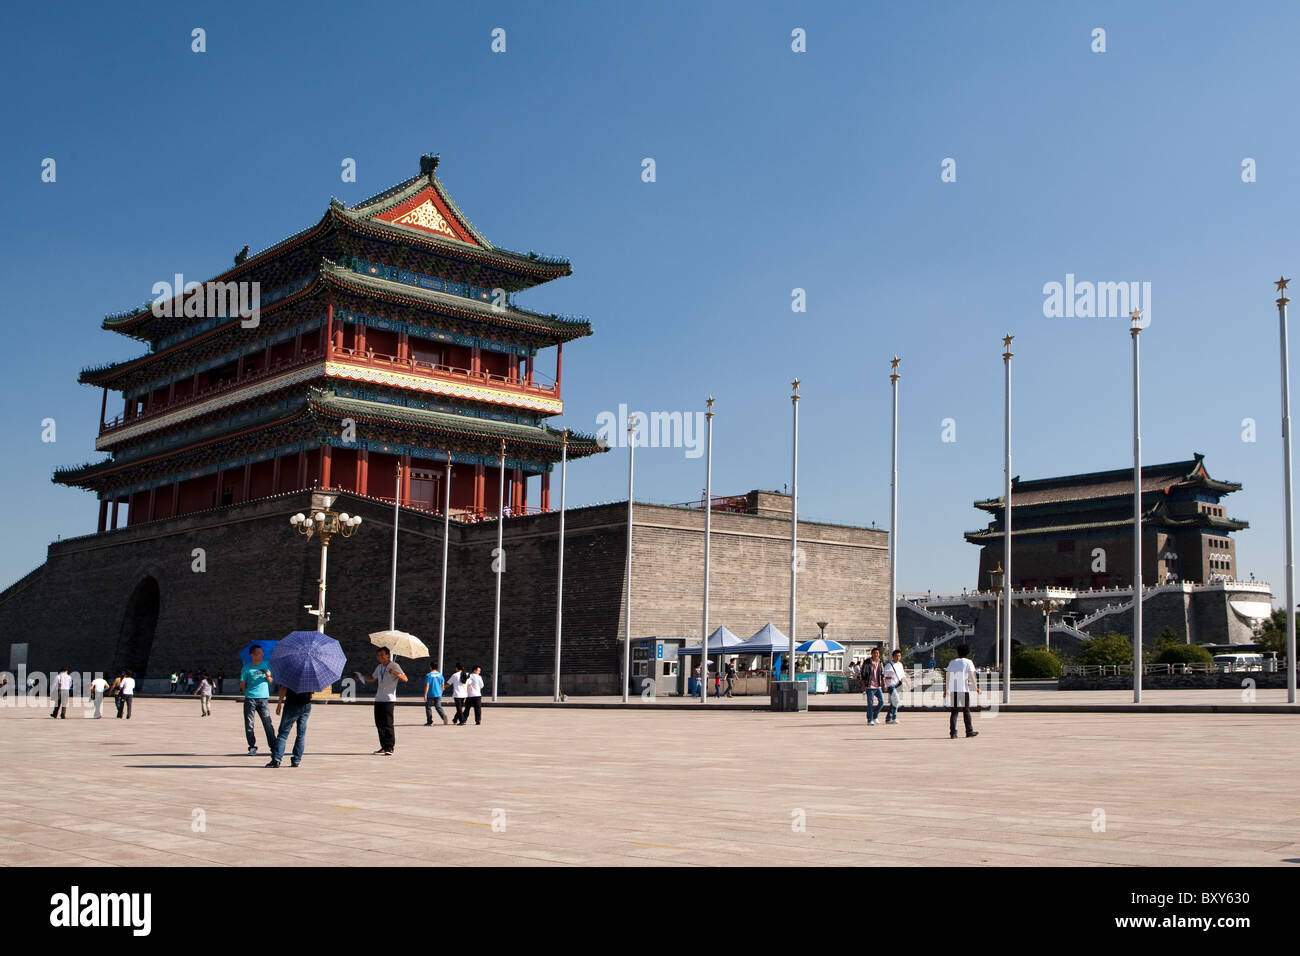 View from Tiananmen Square with the gatehouse (left) and archery tower (right), Qianmen aka Zhengyangmen, Beijing, China Stock Photo